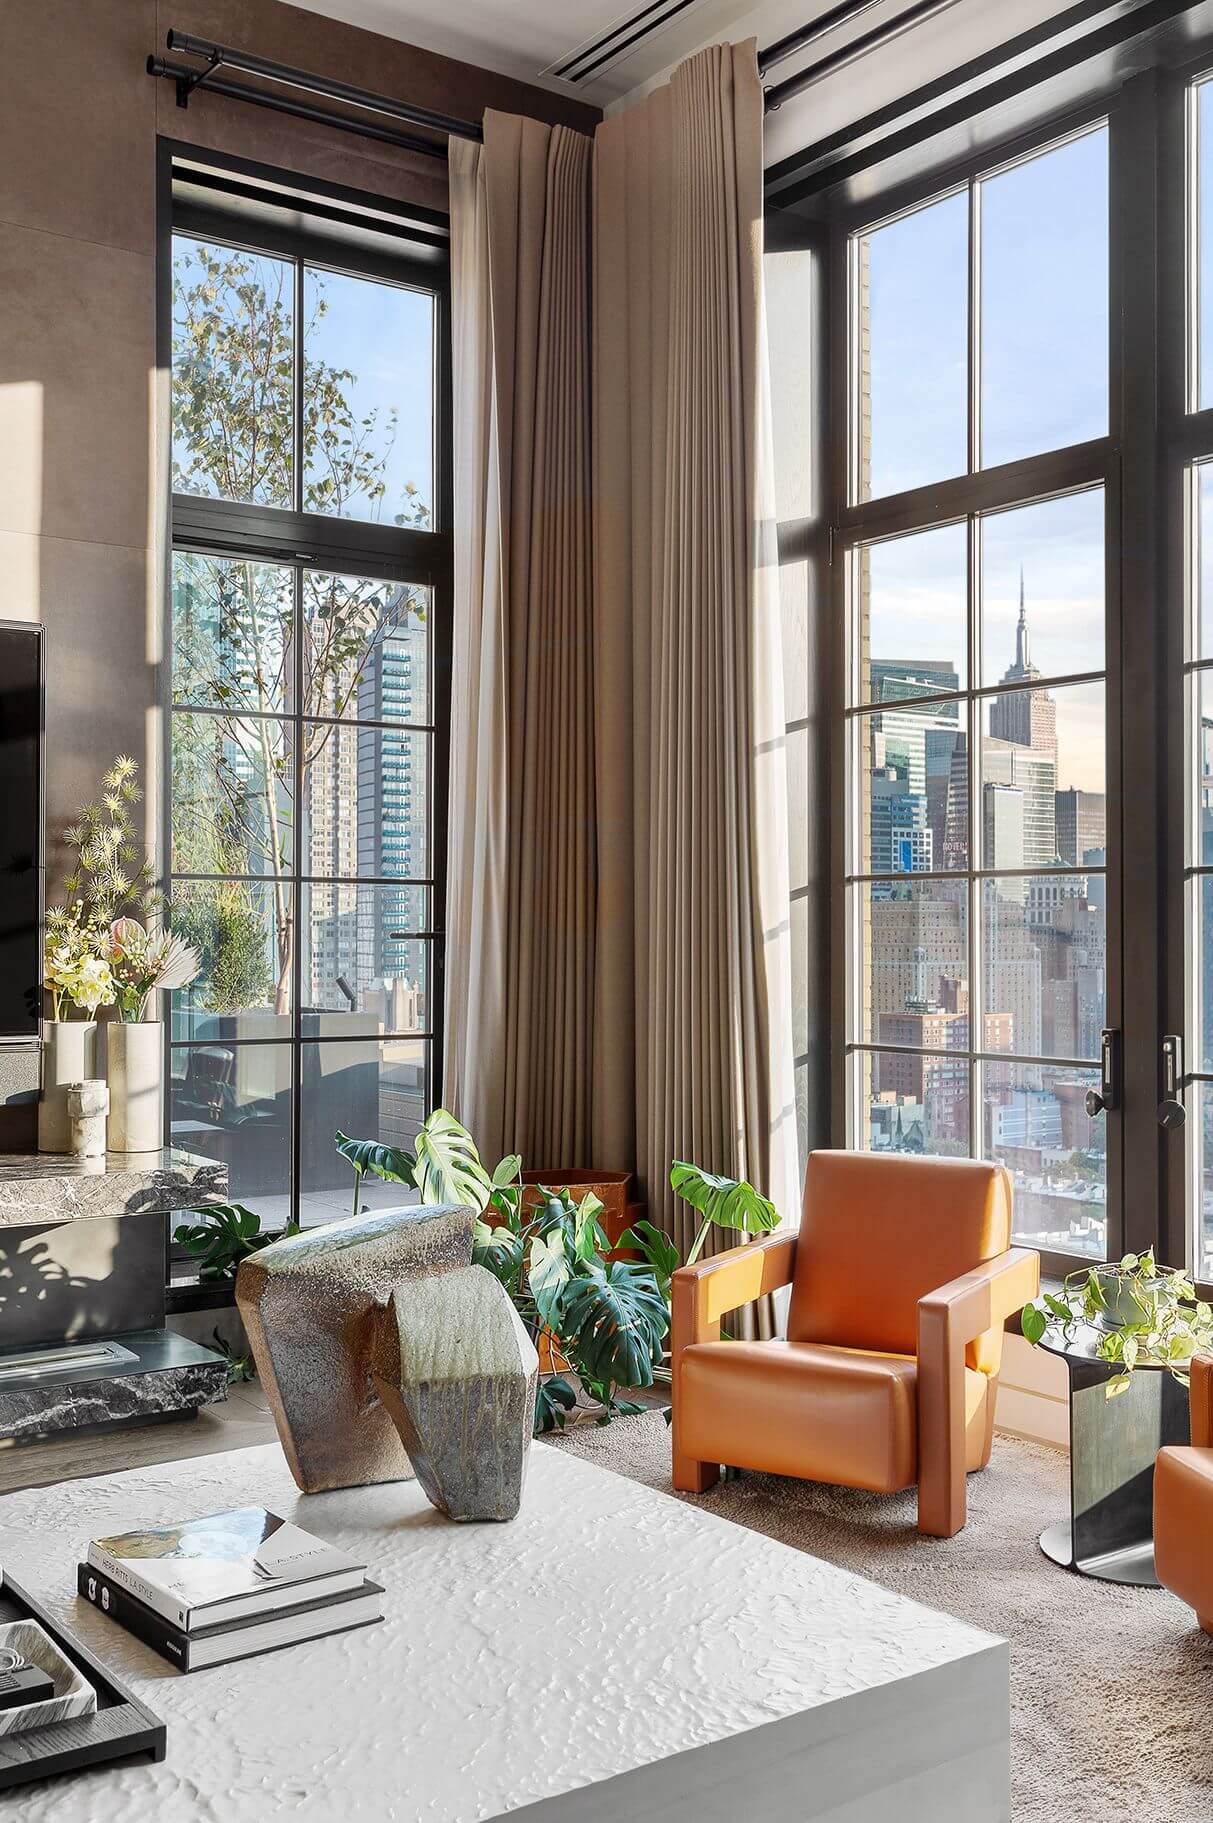 Trevor Noah Sells His Manhattan Penthouse with Roof Terrace